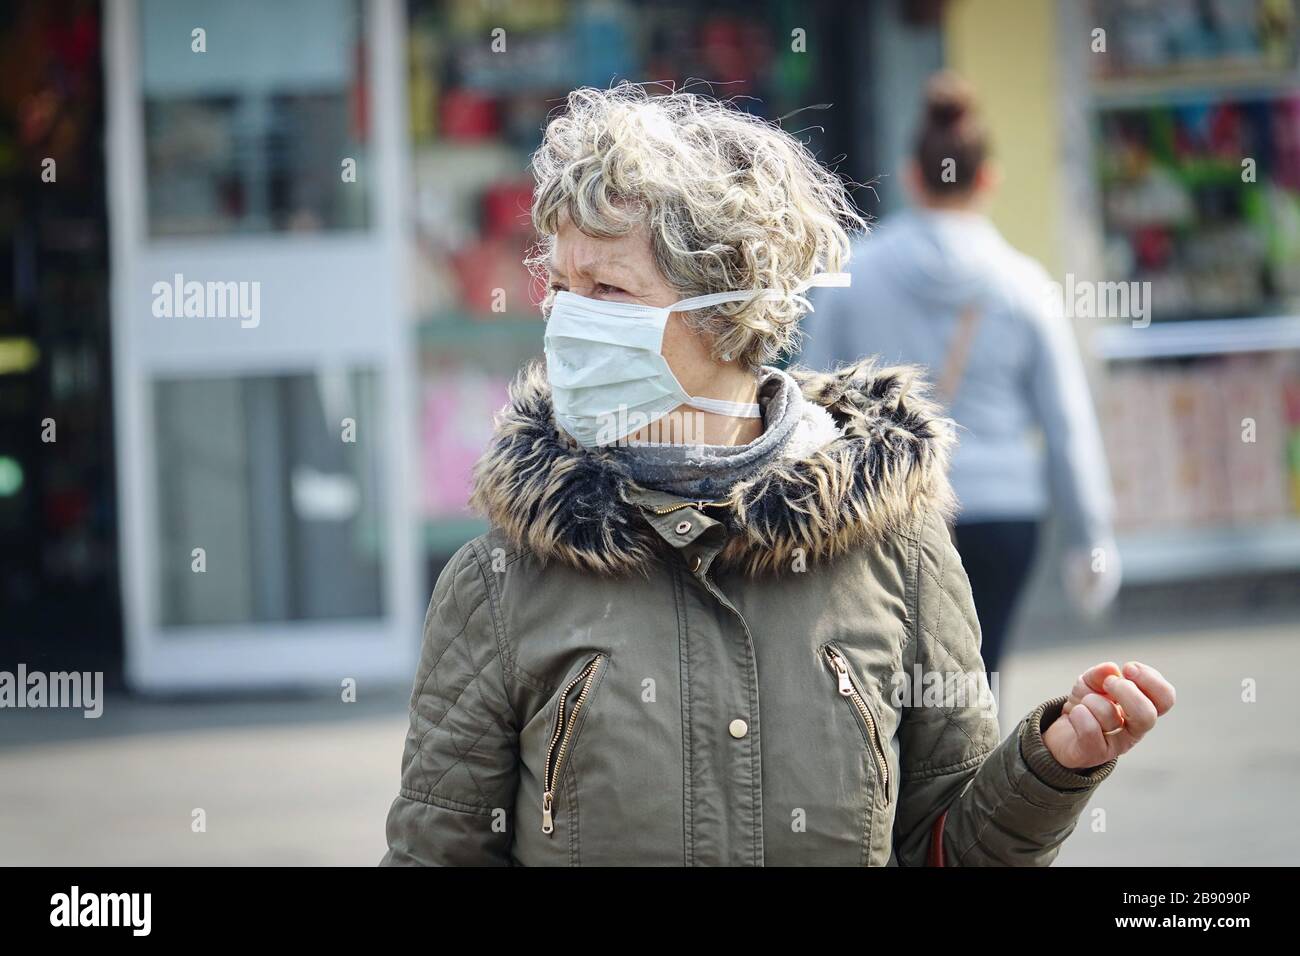 An elderly woman wearing a mask in the market. Selective focus on the face. Milan, Italy - March 2020 Stock Photo